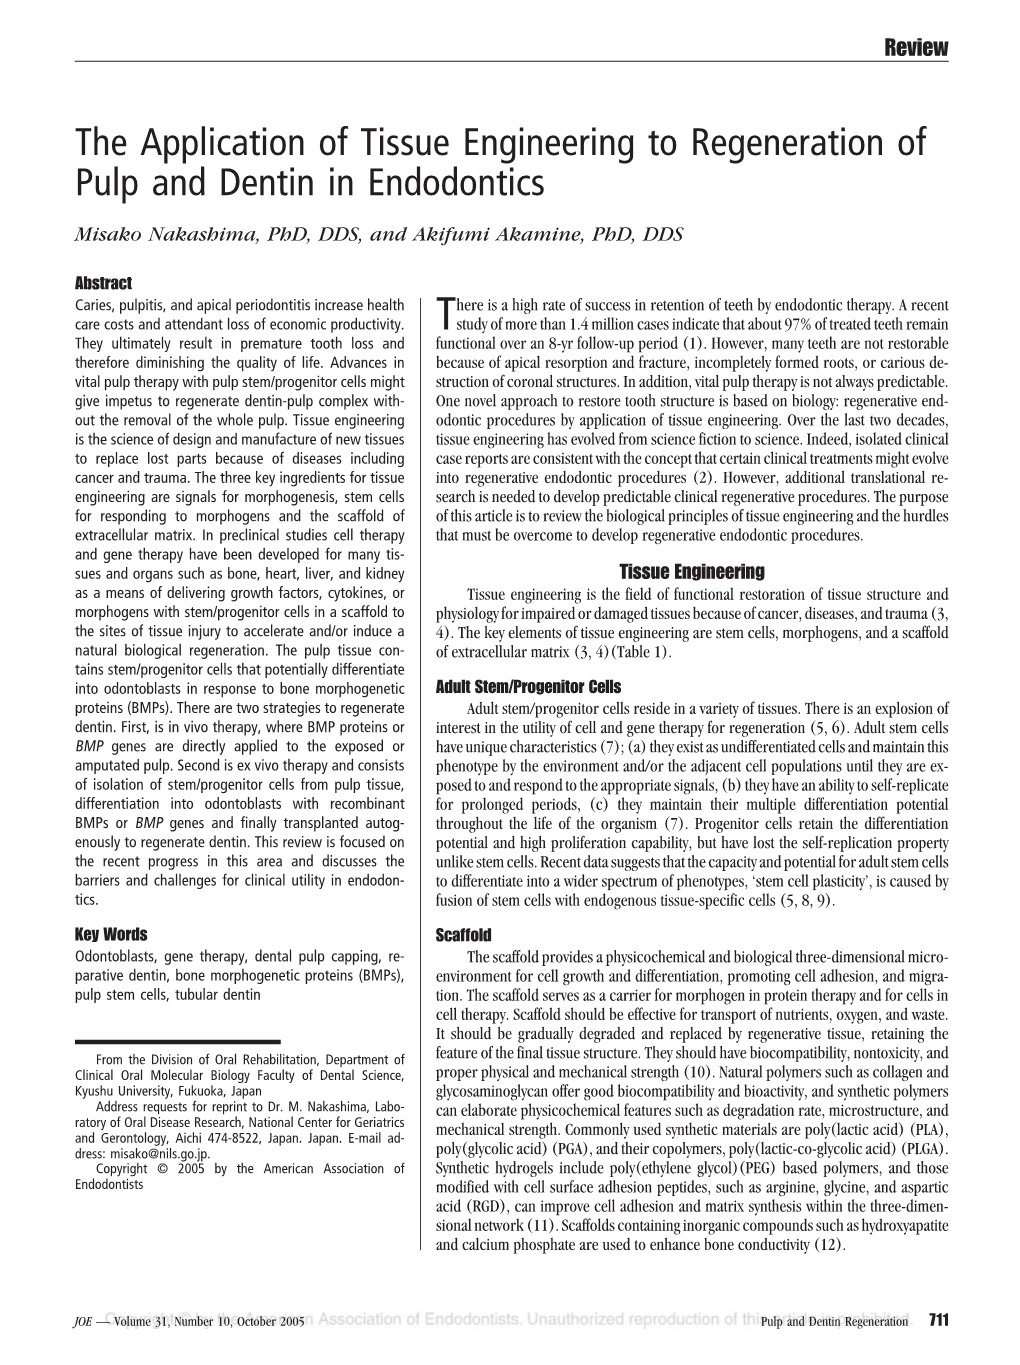 The Application of Tissue Engineering to Regeneration of Pulp and Dentin in Endodontics Misako Nakashima, Phd, DDS, and Akifumi Akamine, Phd, DDS